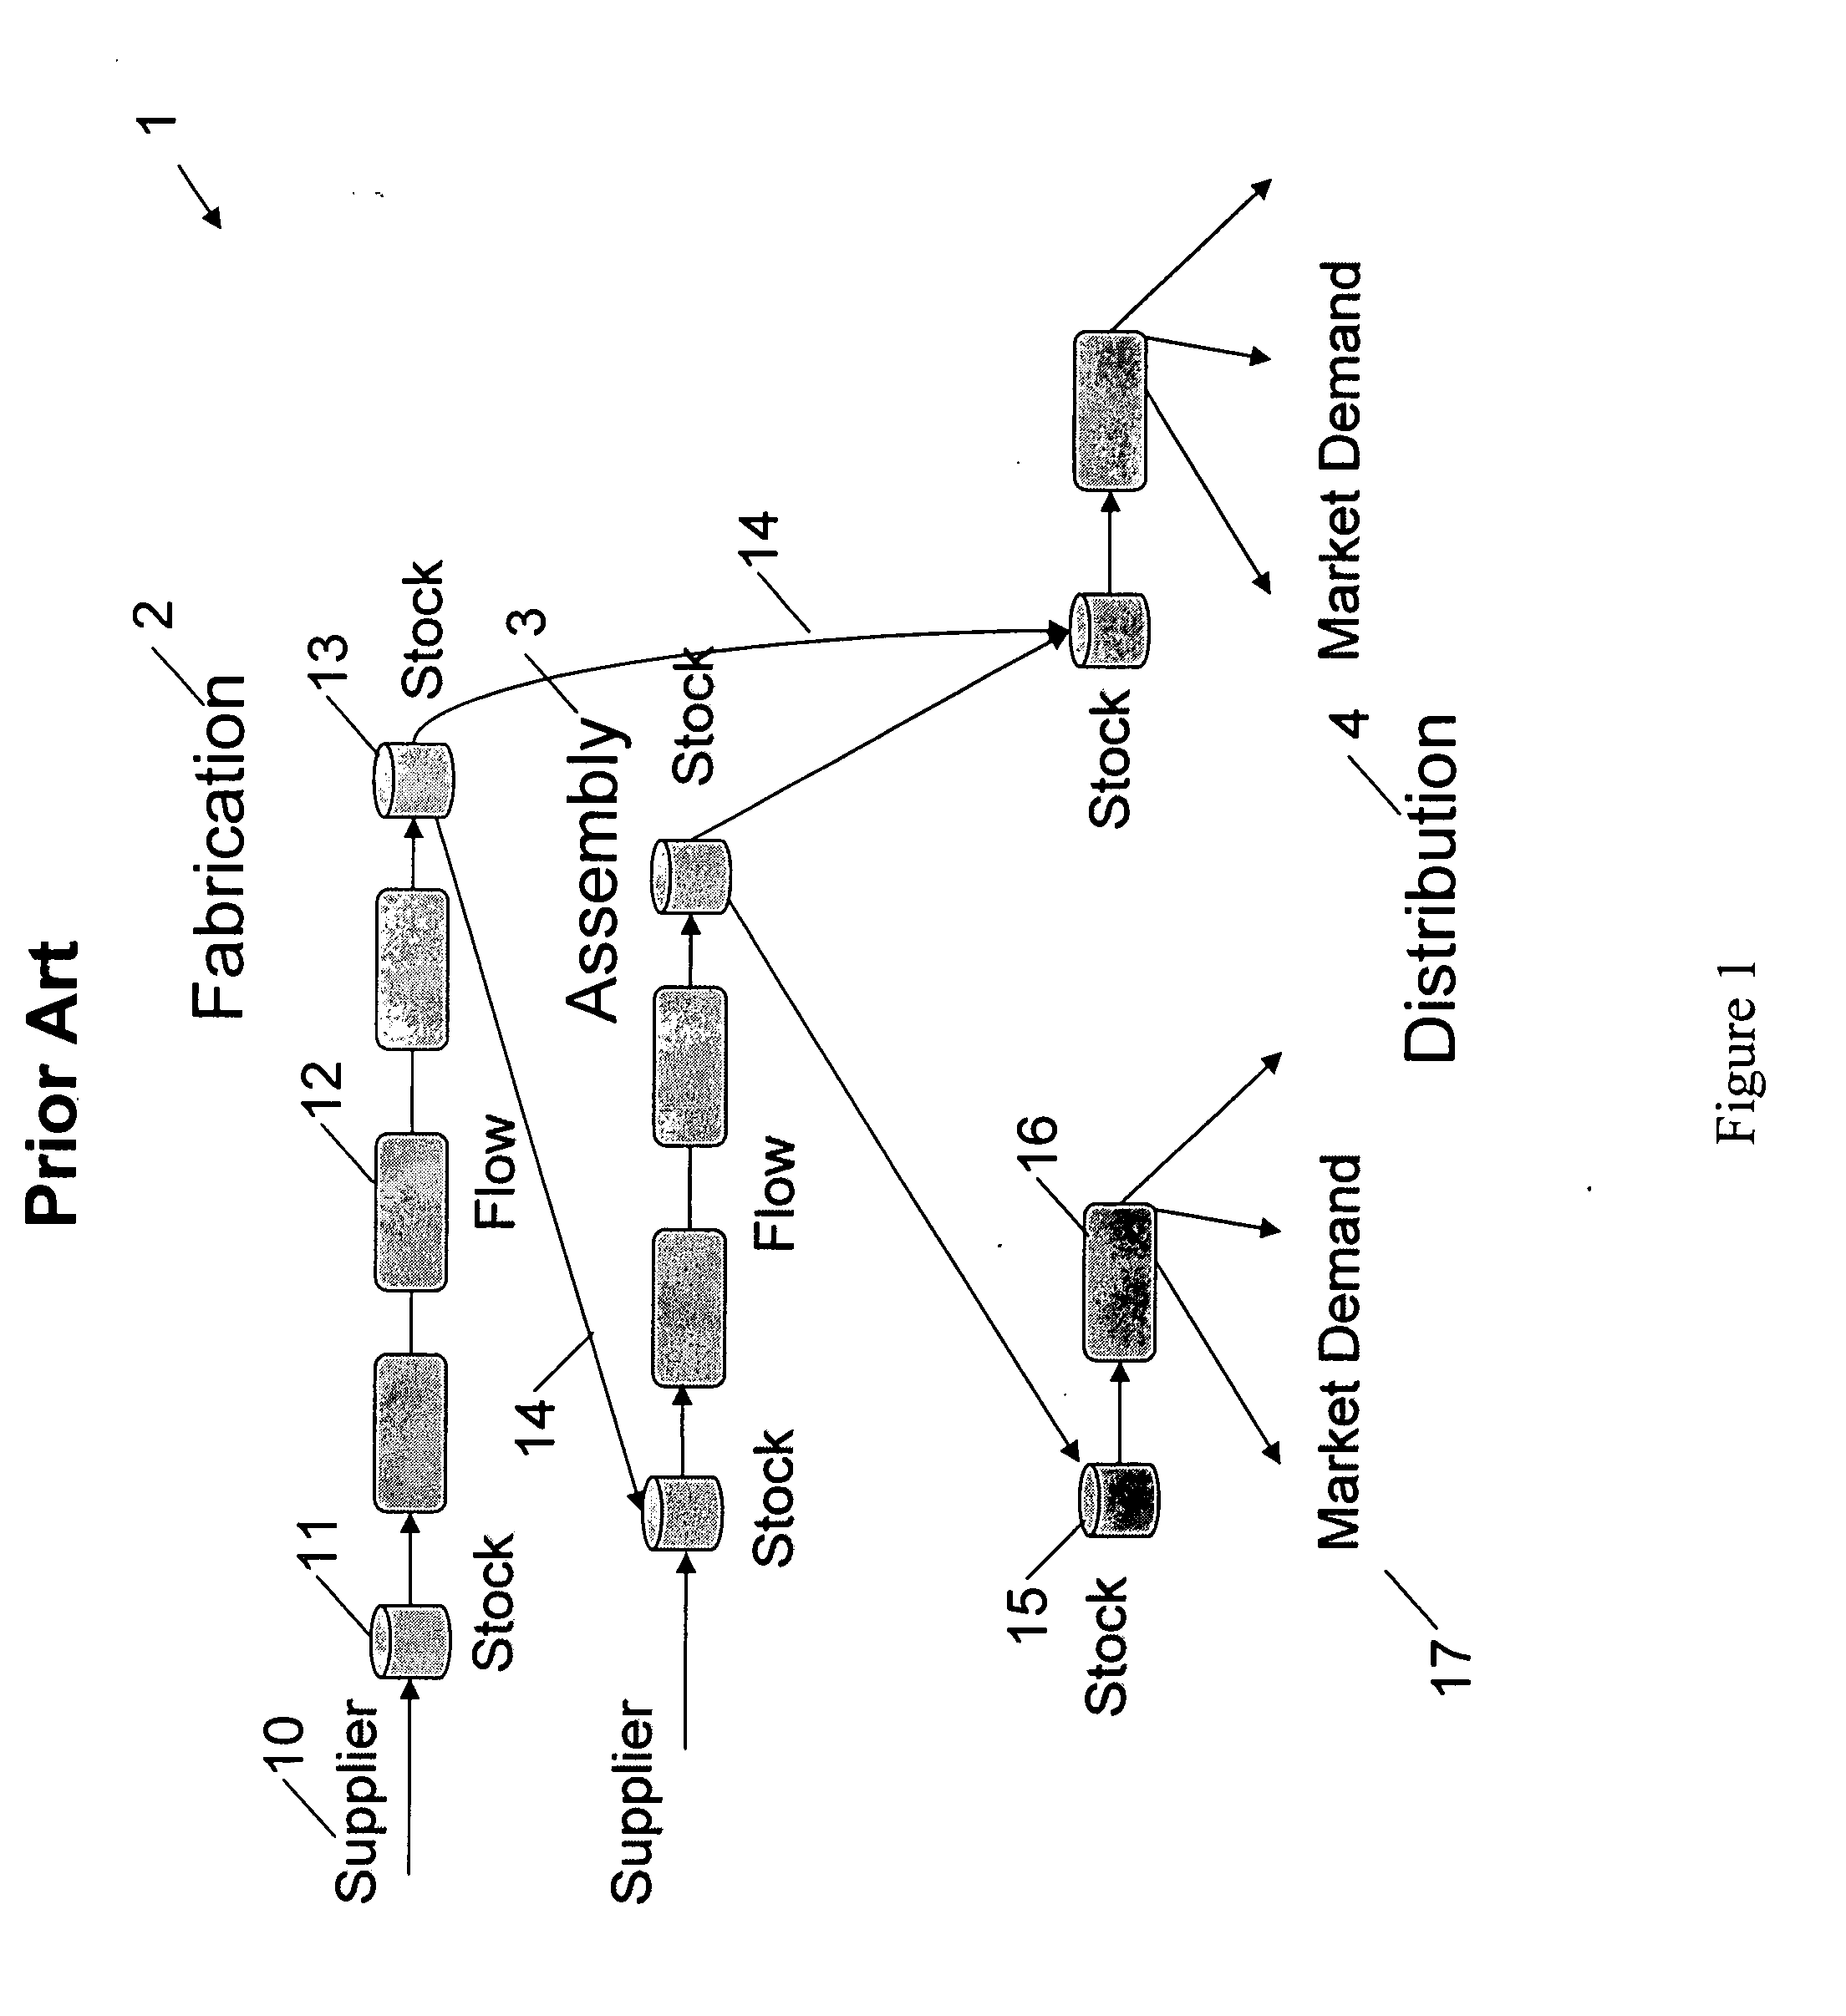 Methods and systems for employing dynamic risk-based scheduling to optimize and integrate production with a supply chain